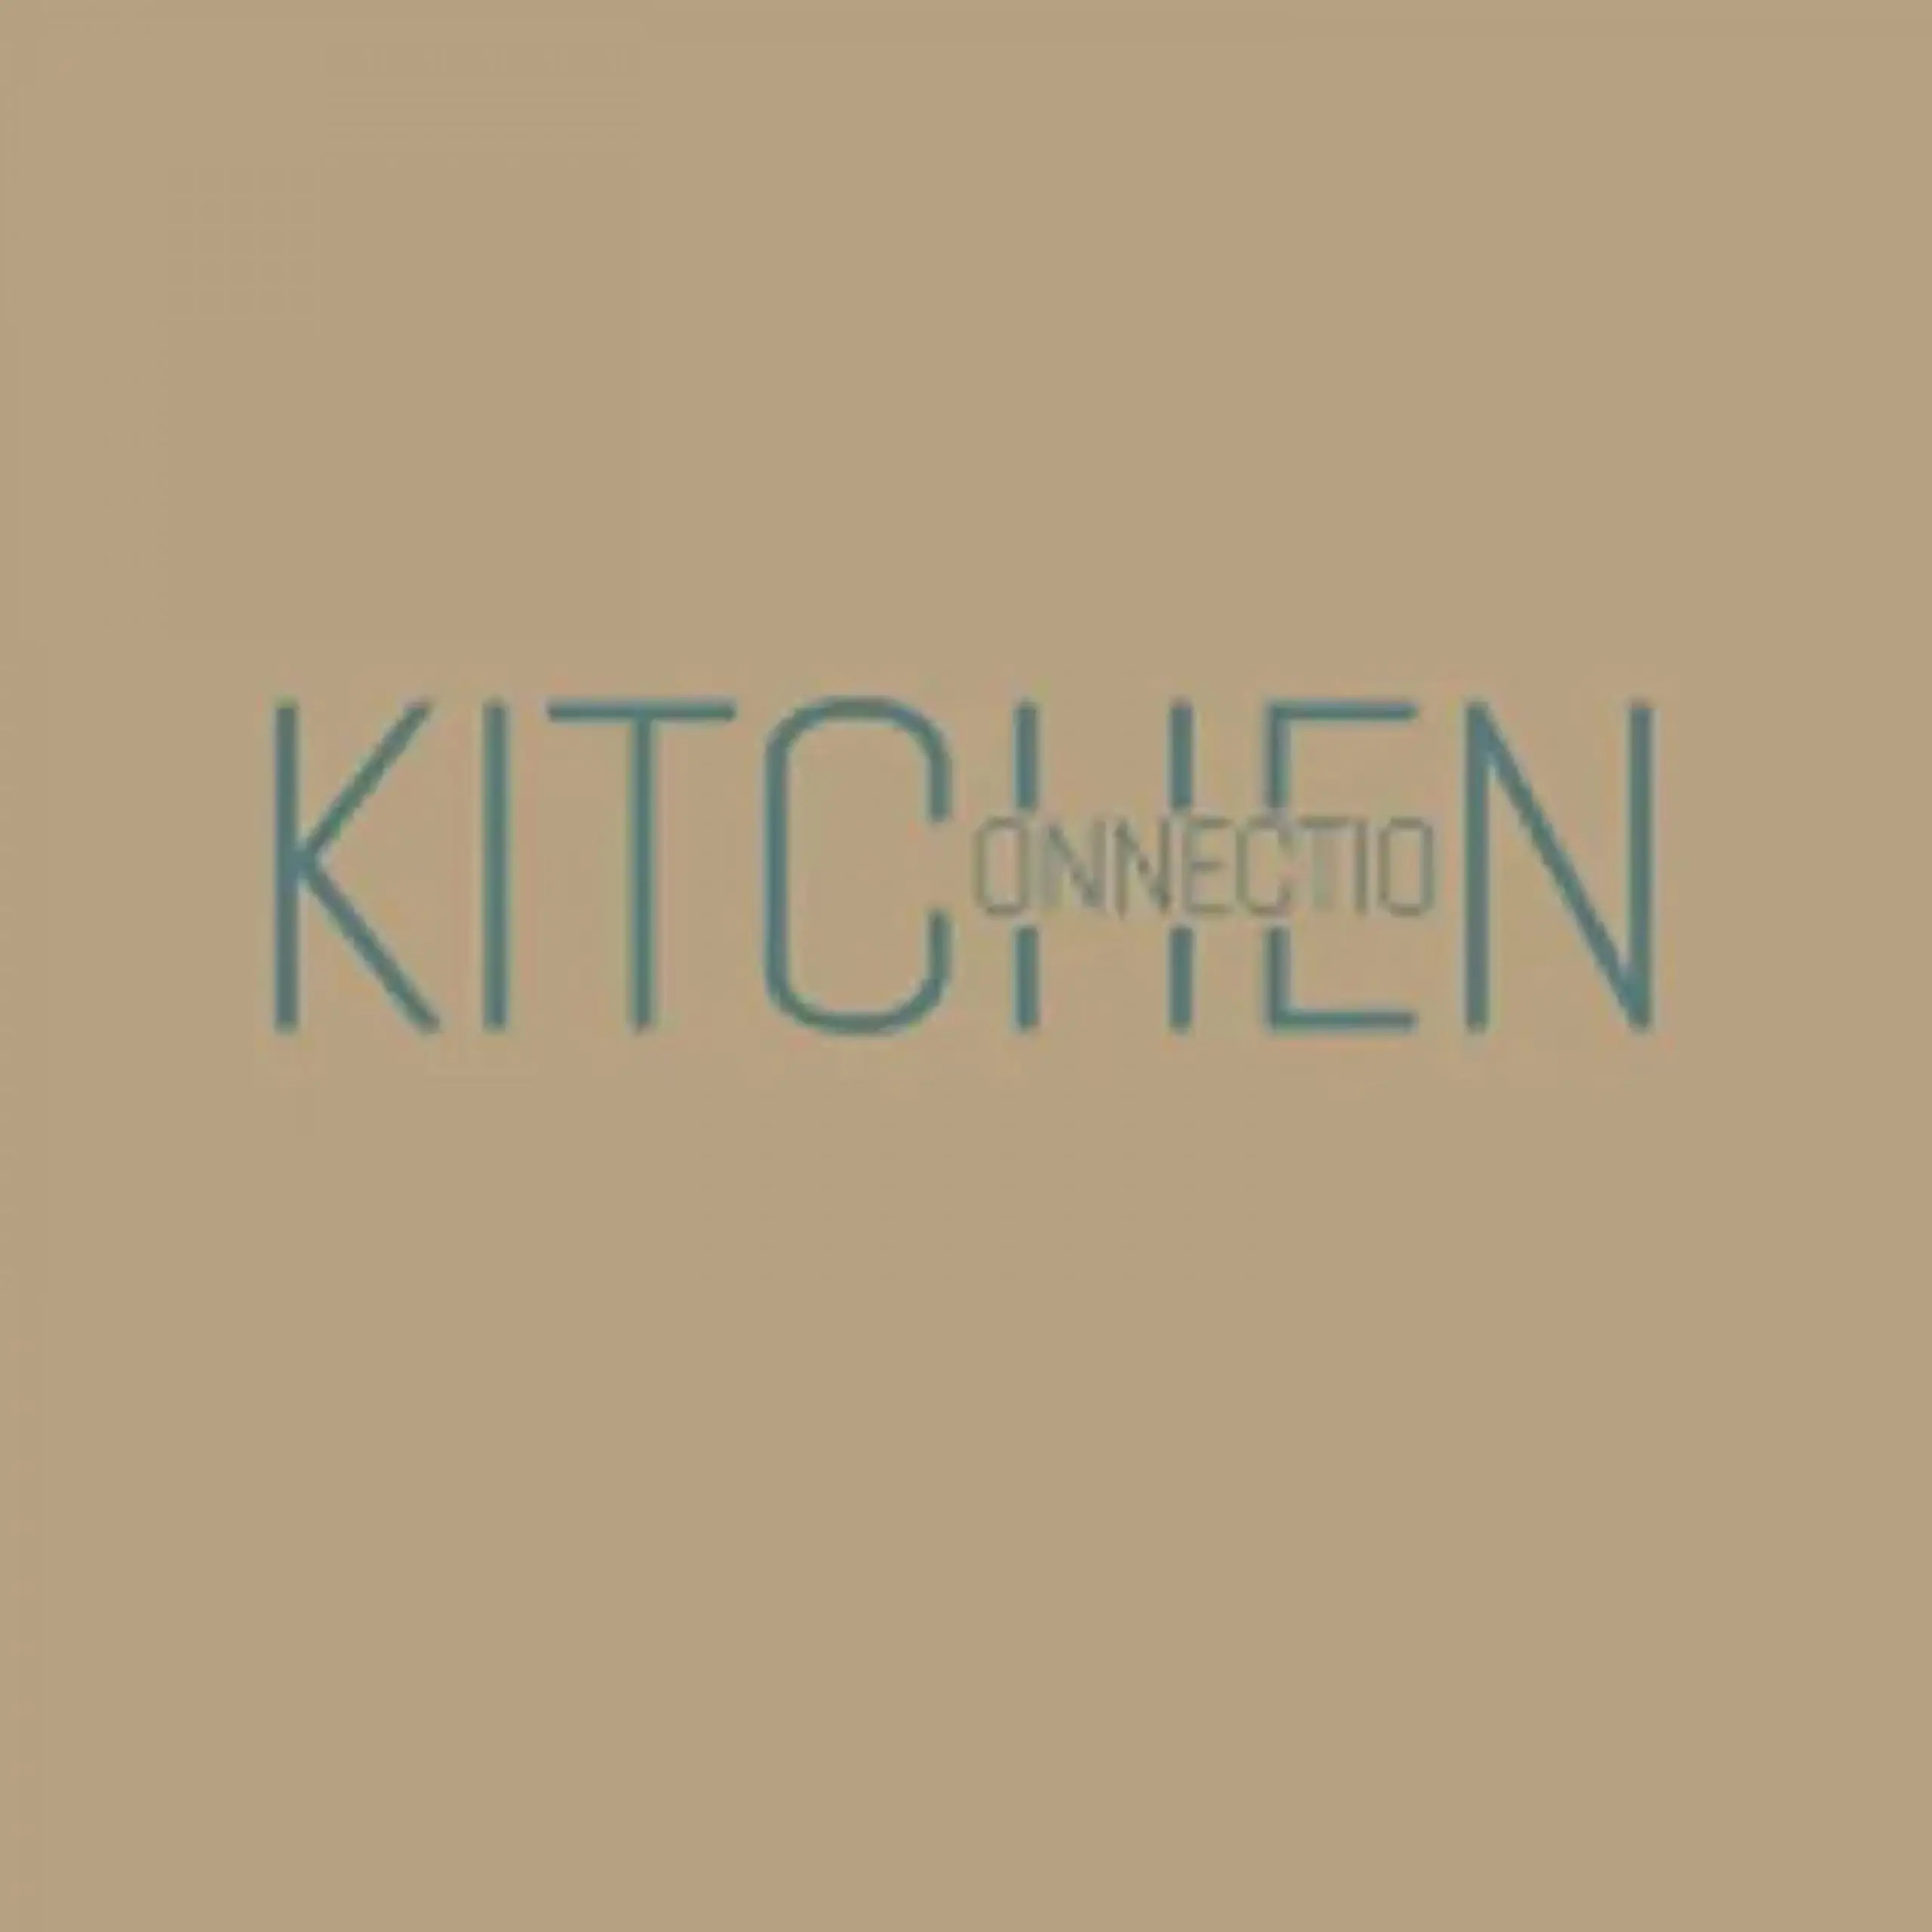 Kitchen Connection - Coming Soon in UAE